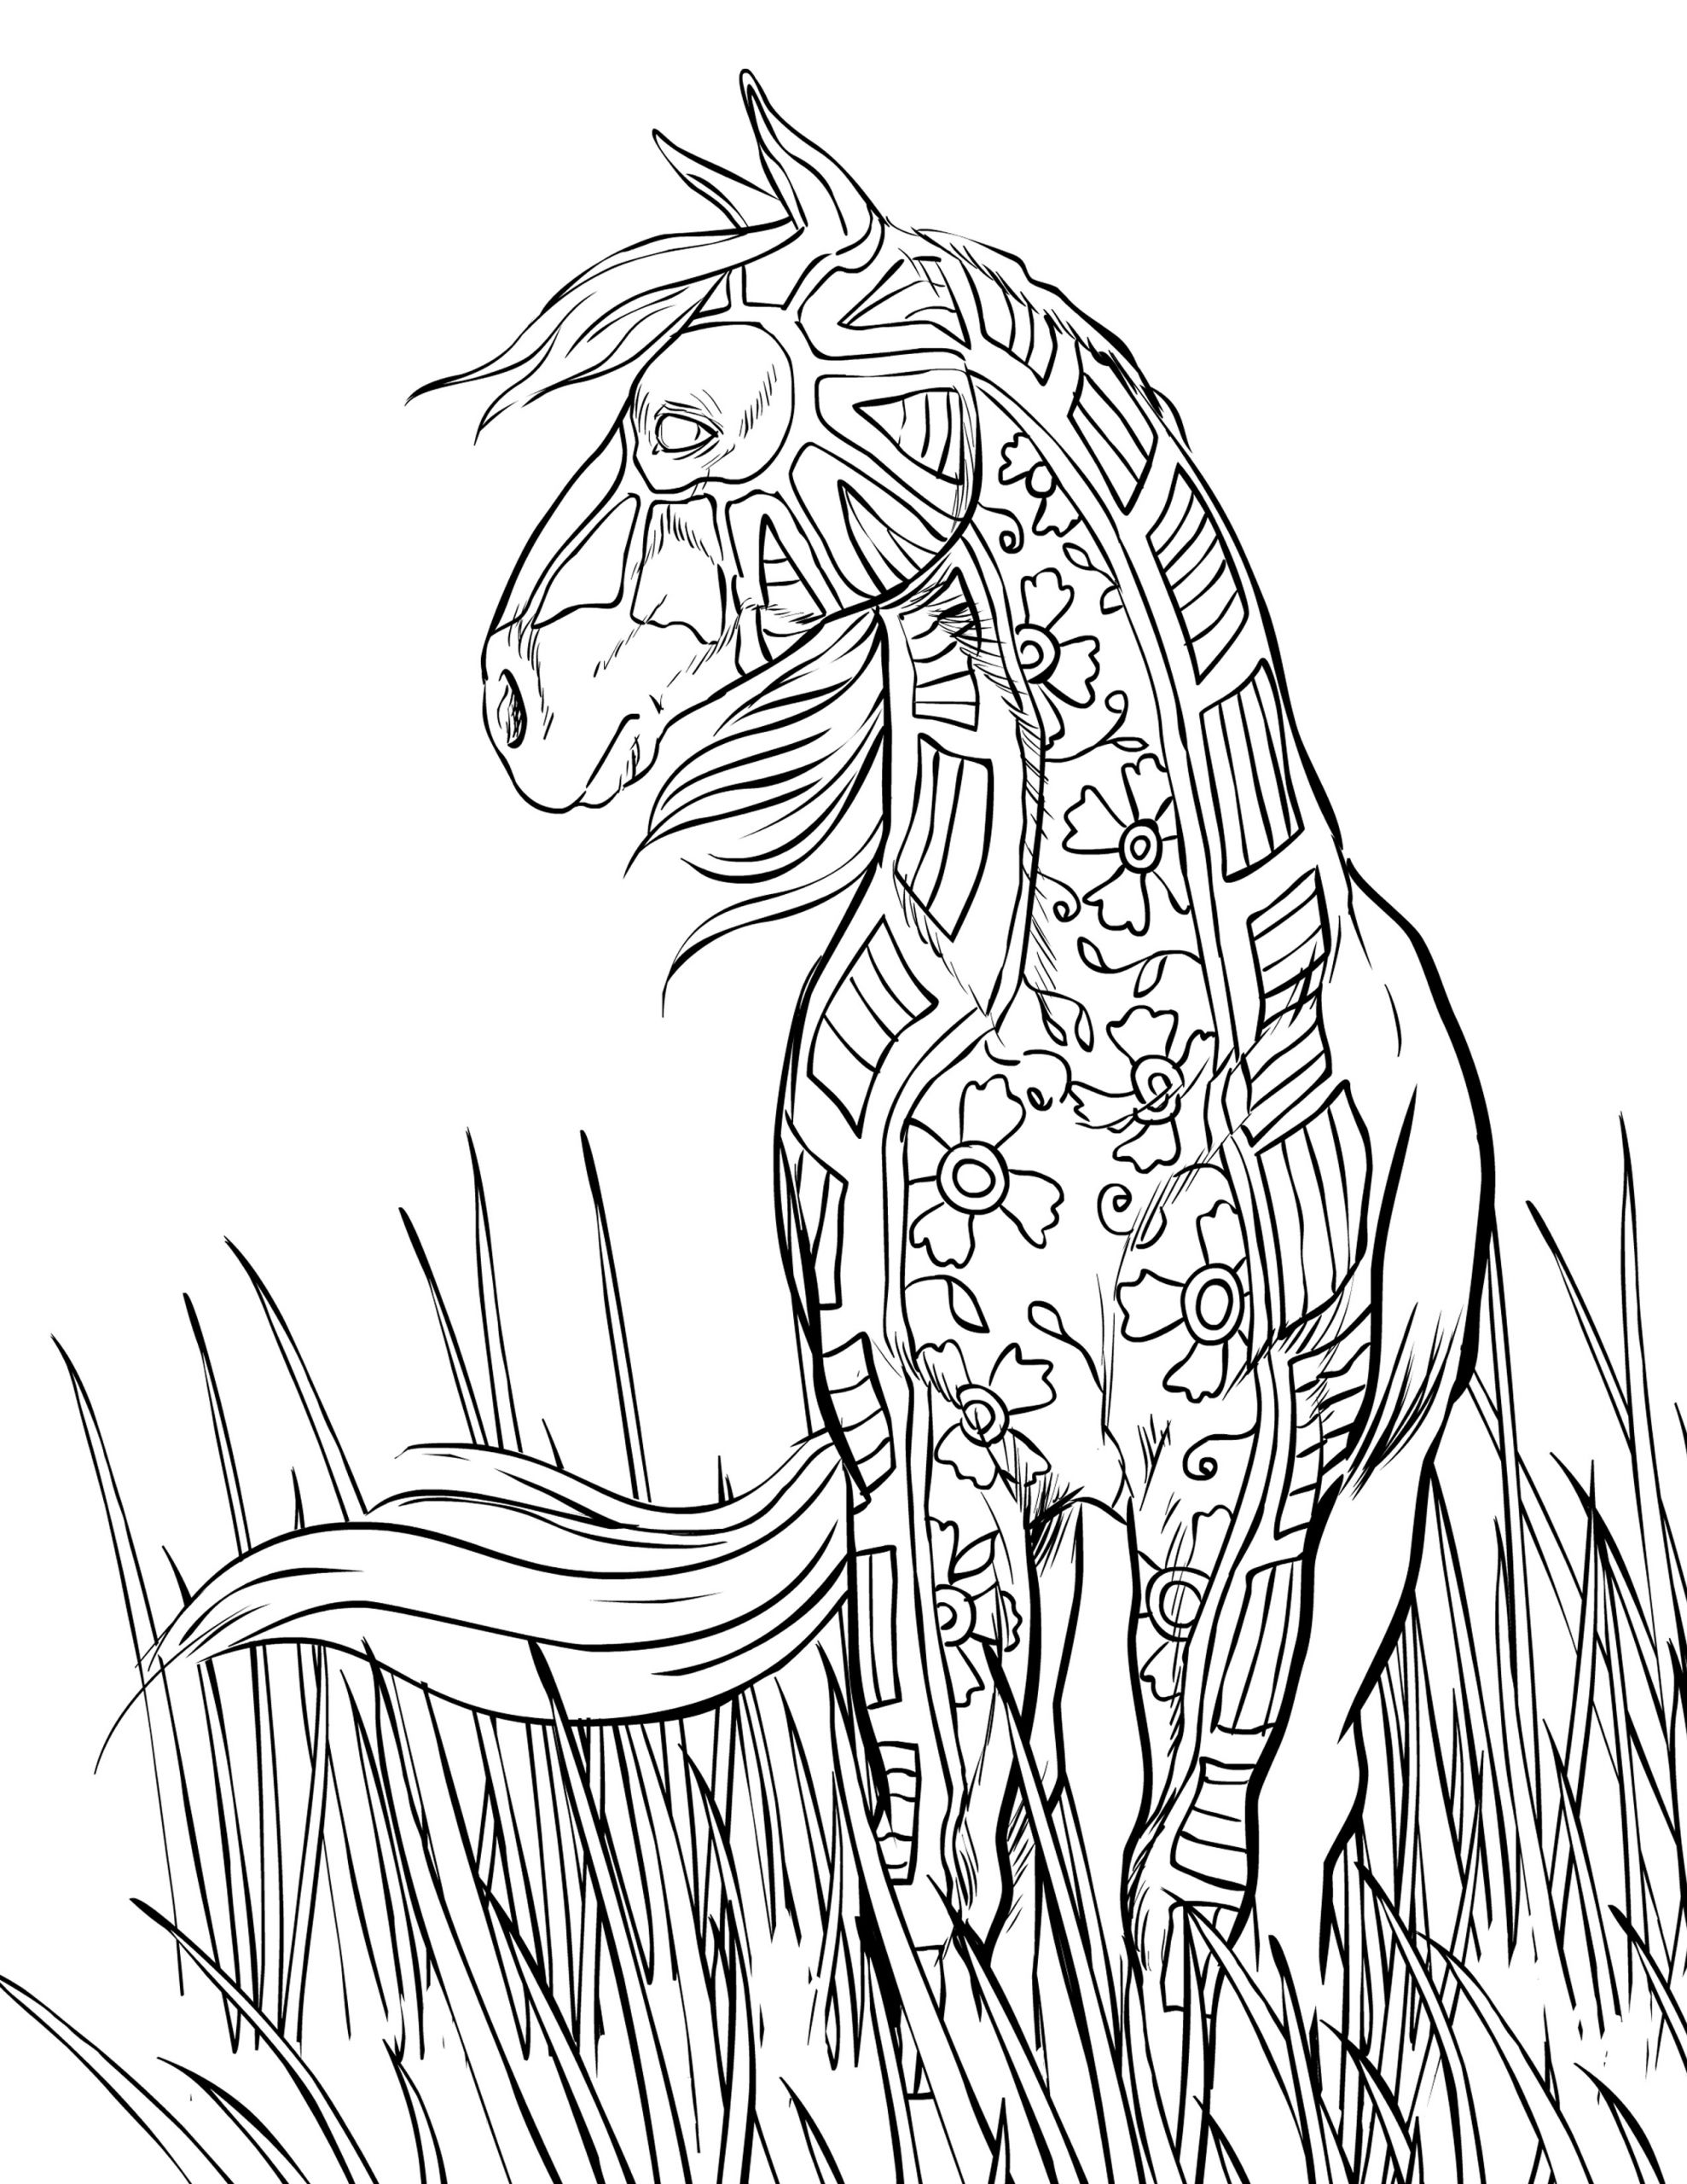 Adult Coloring Pages Horse
 FREE HORSE COLORING PAGES